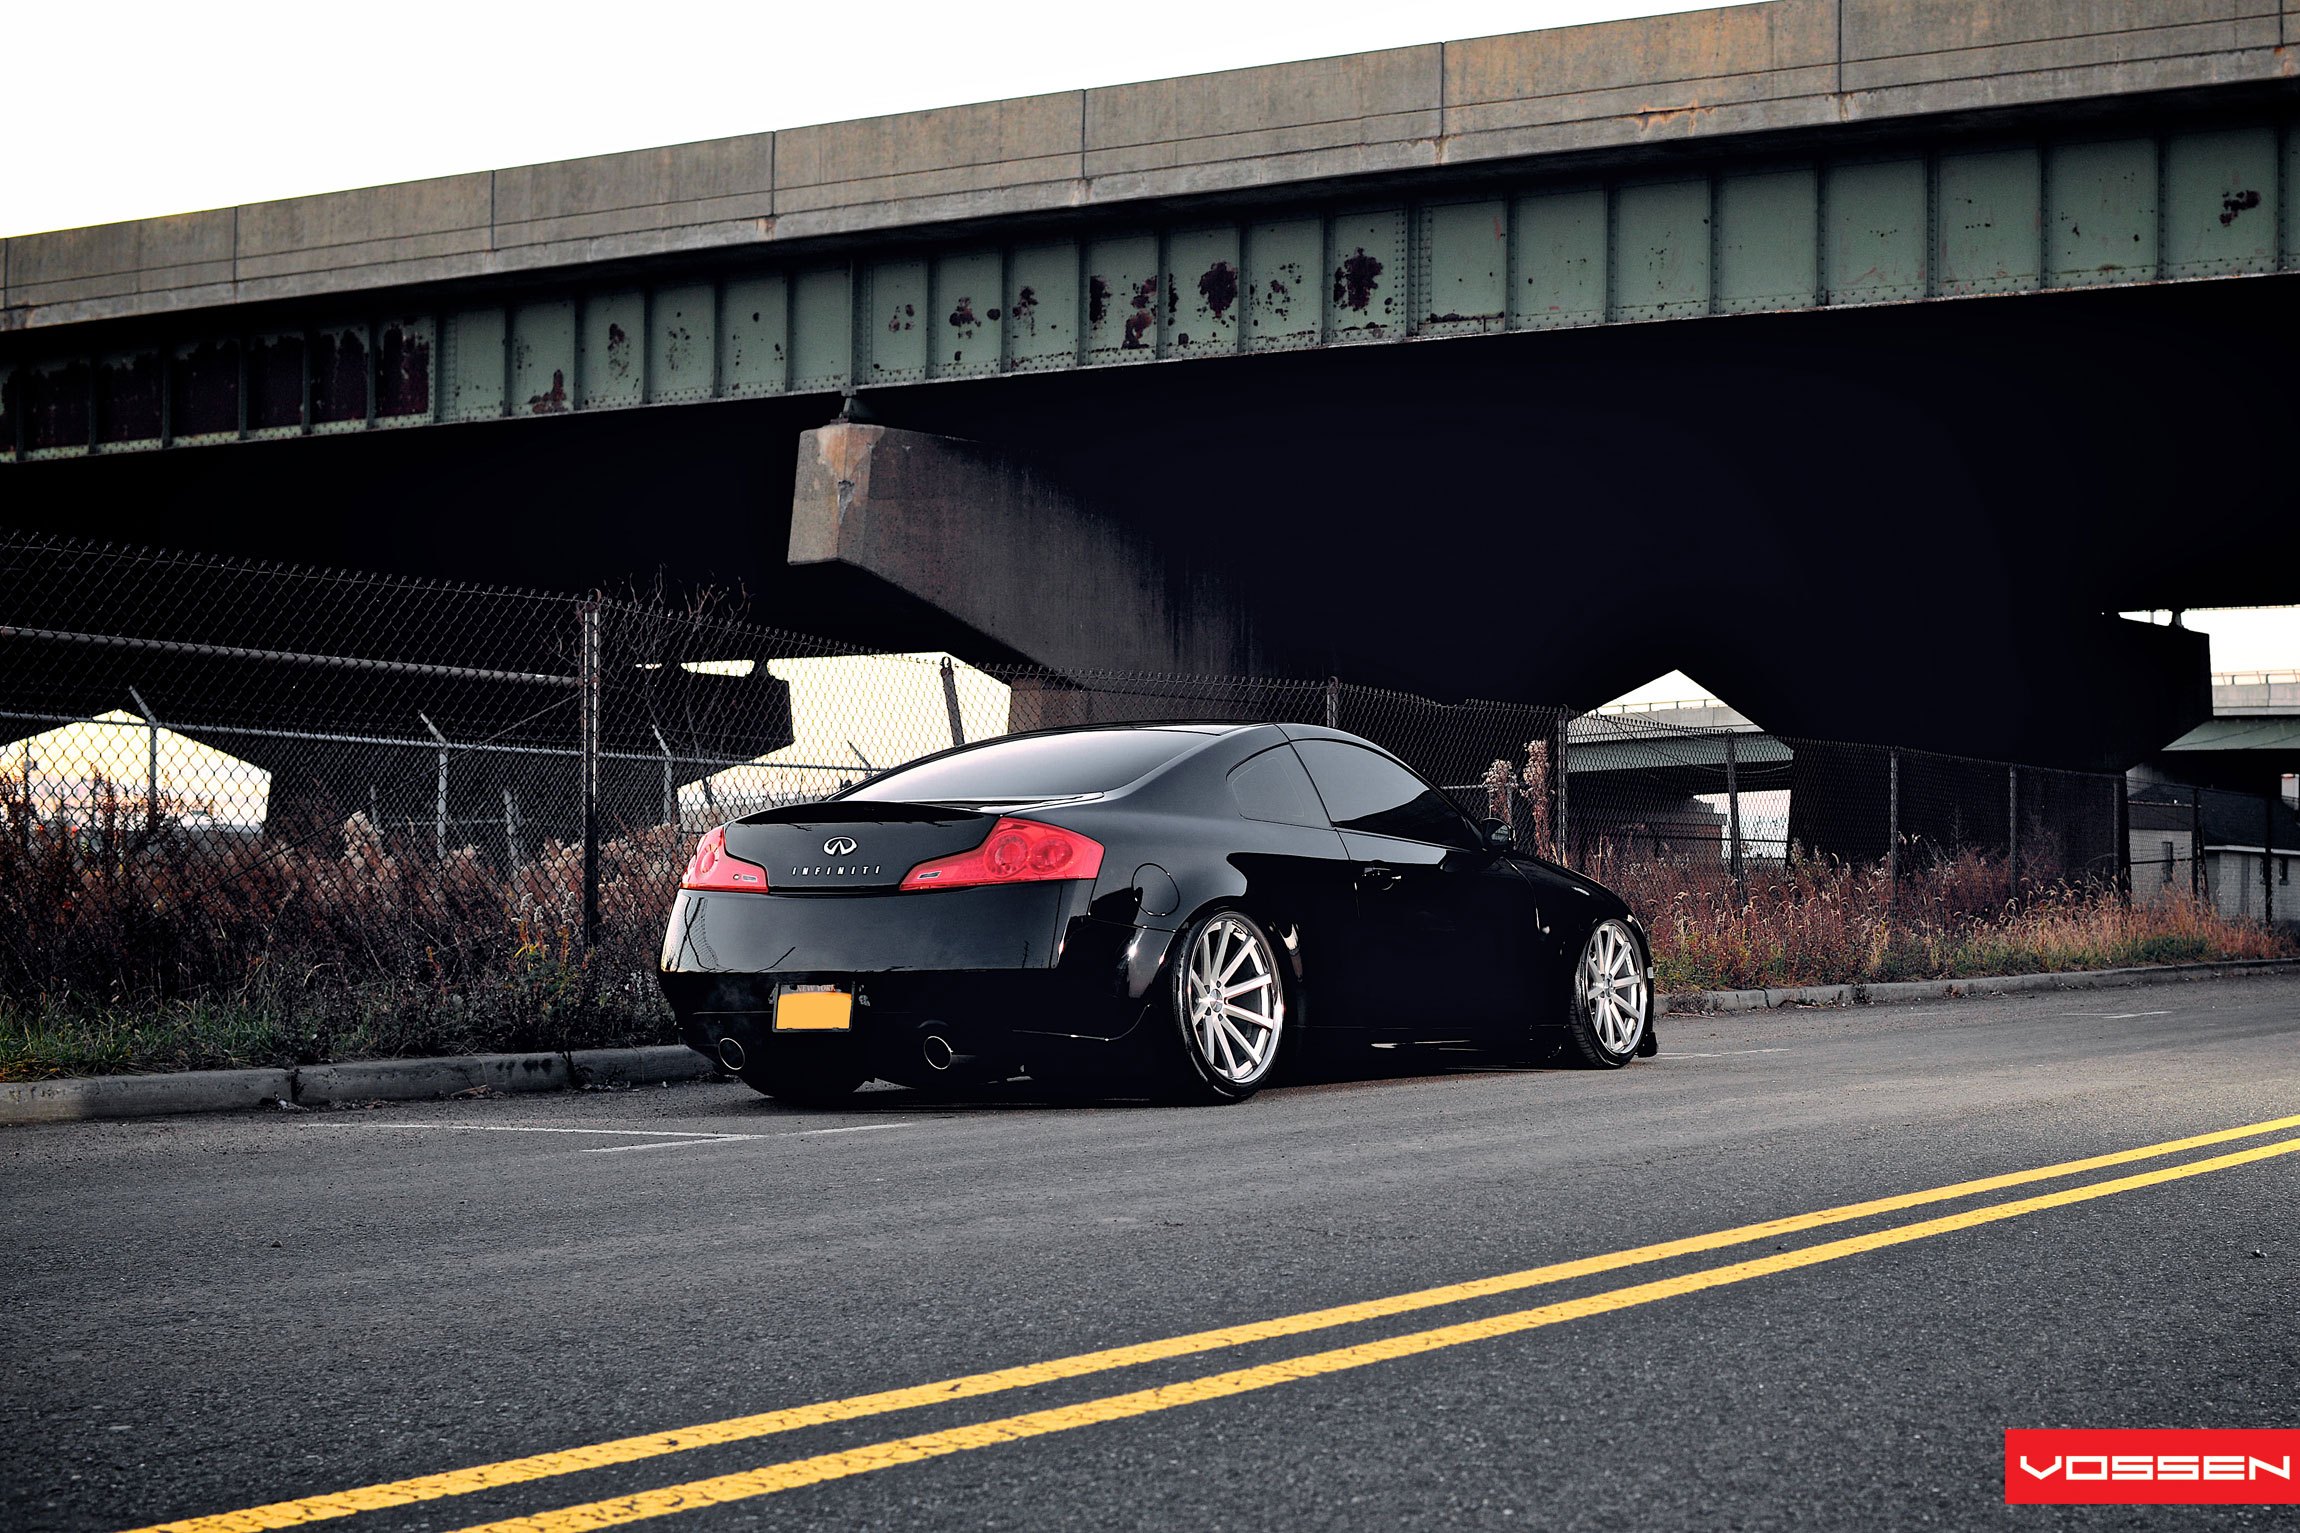 Aftermarket Red Taillights on Black Infiniti G35 - Photo by Vossen